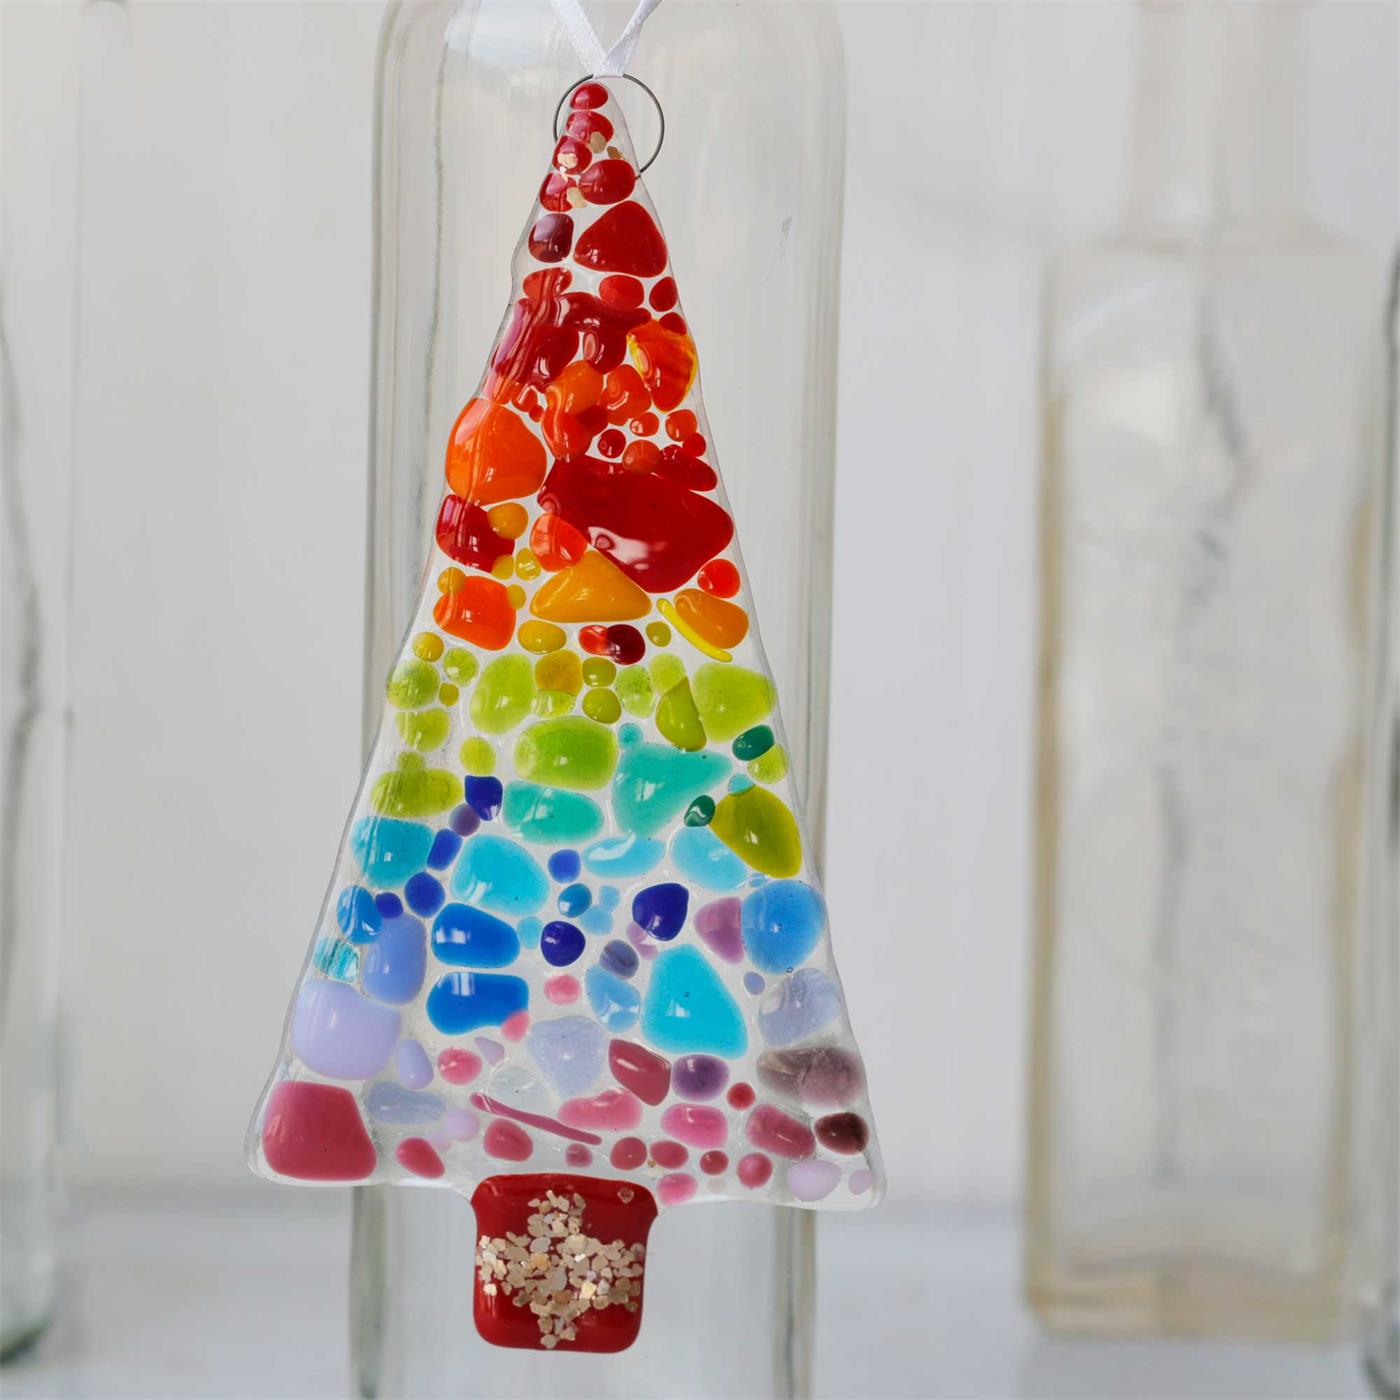 Tektonisch Visa Bewust worden Make At Home Fused Glass Christmas Tree Kit by molten wonky